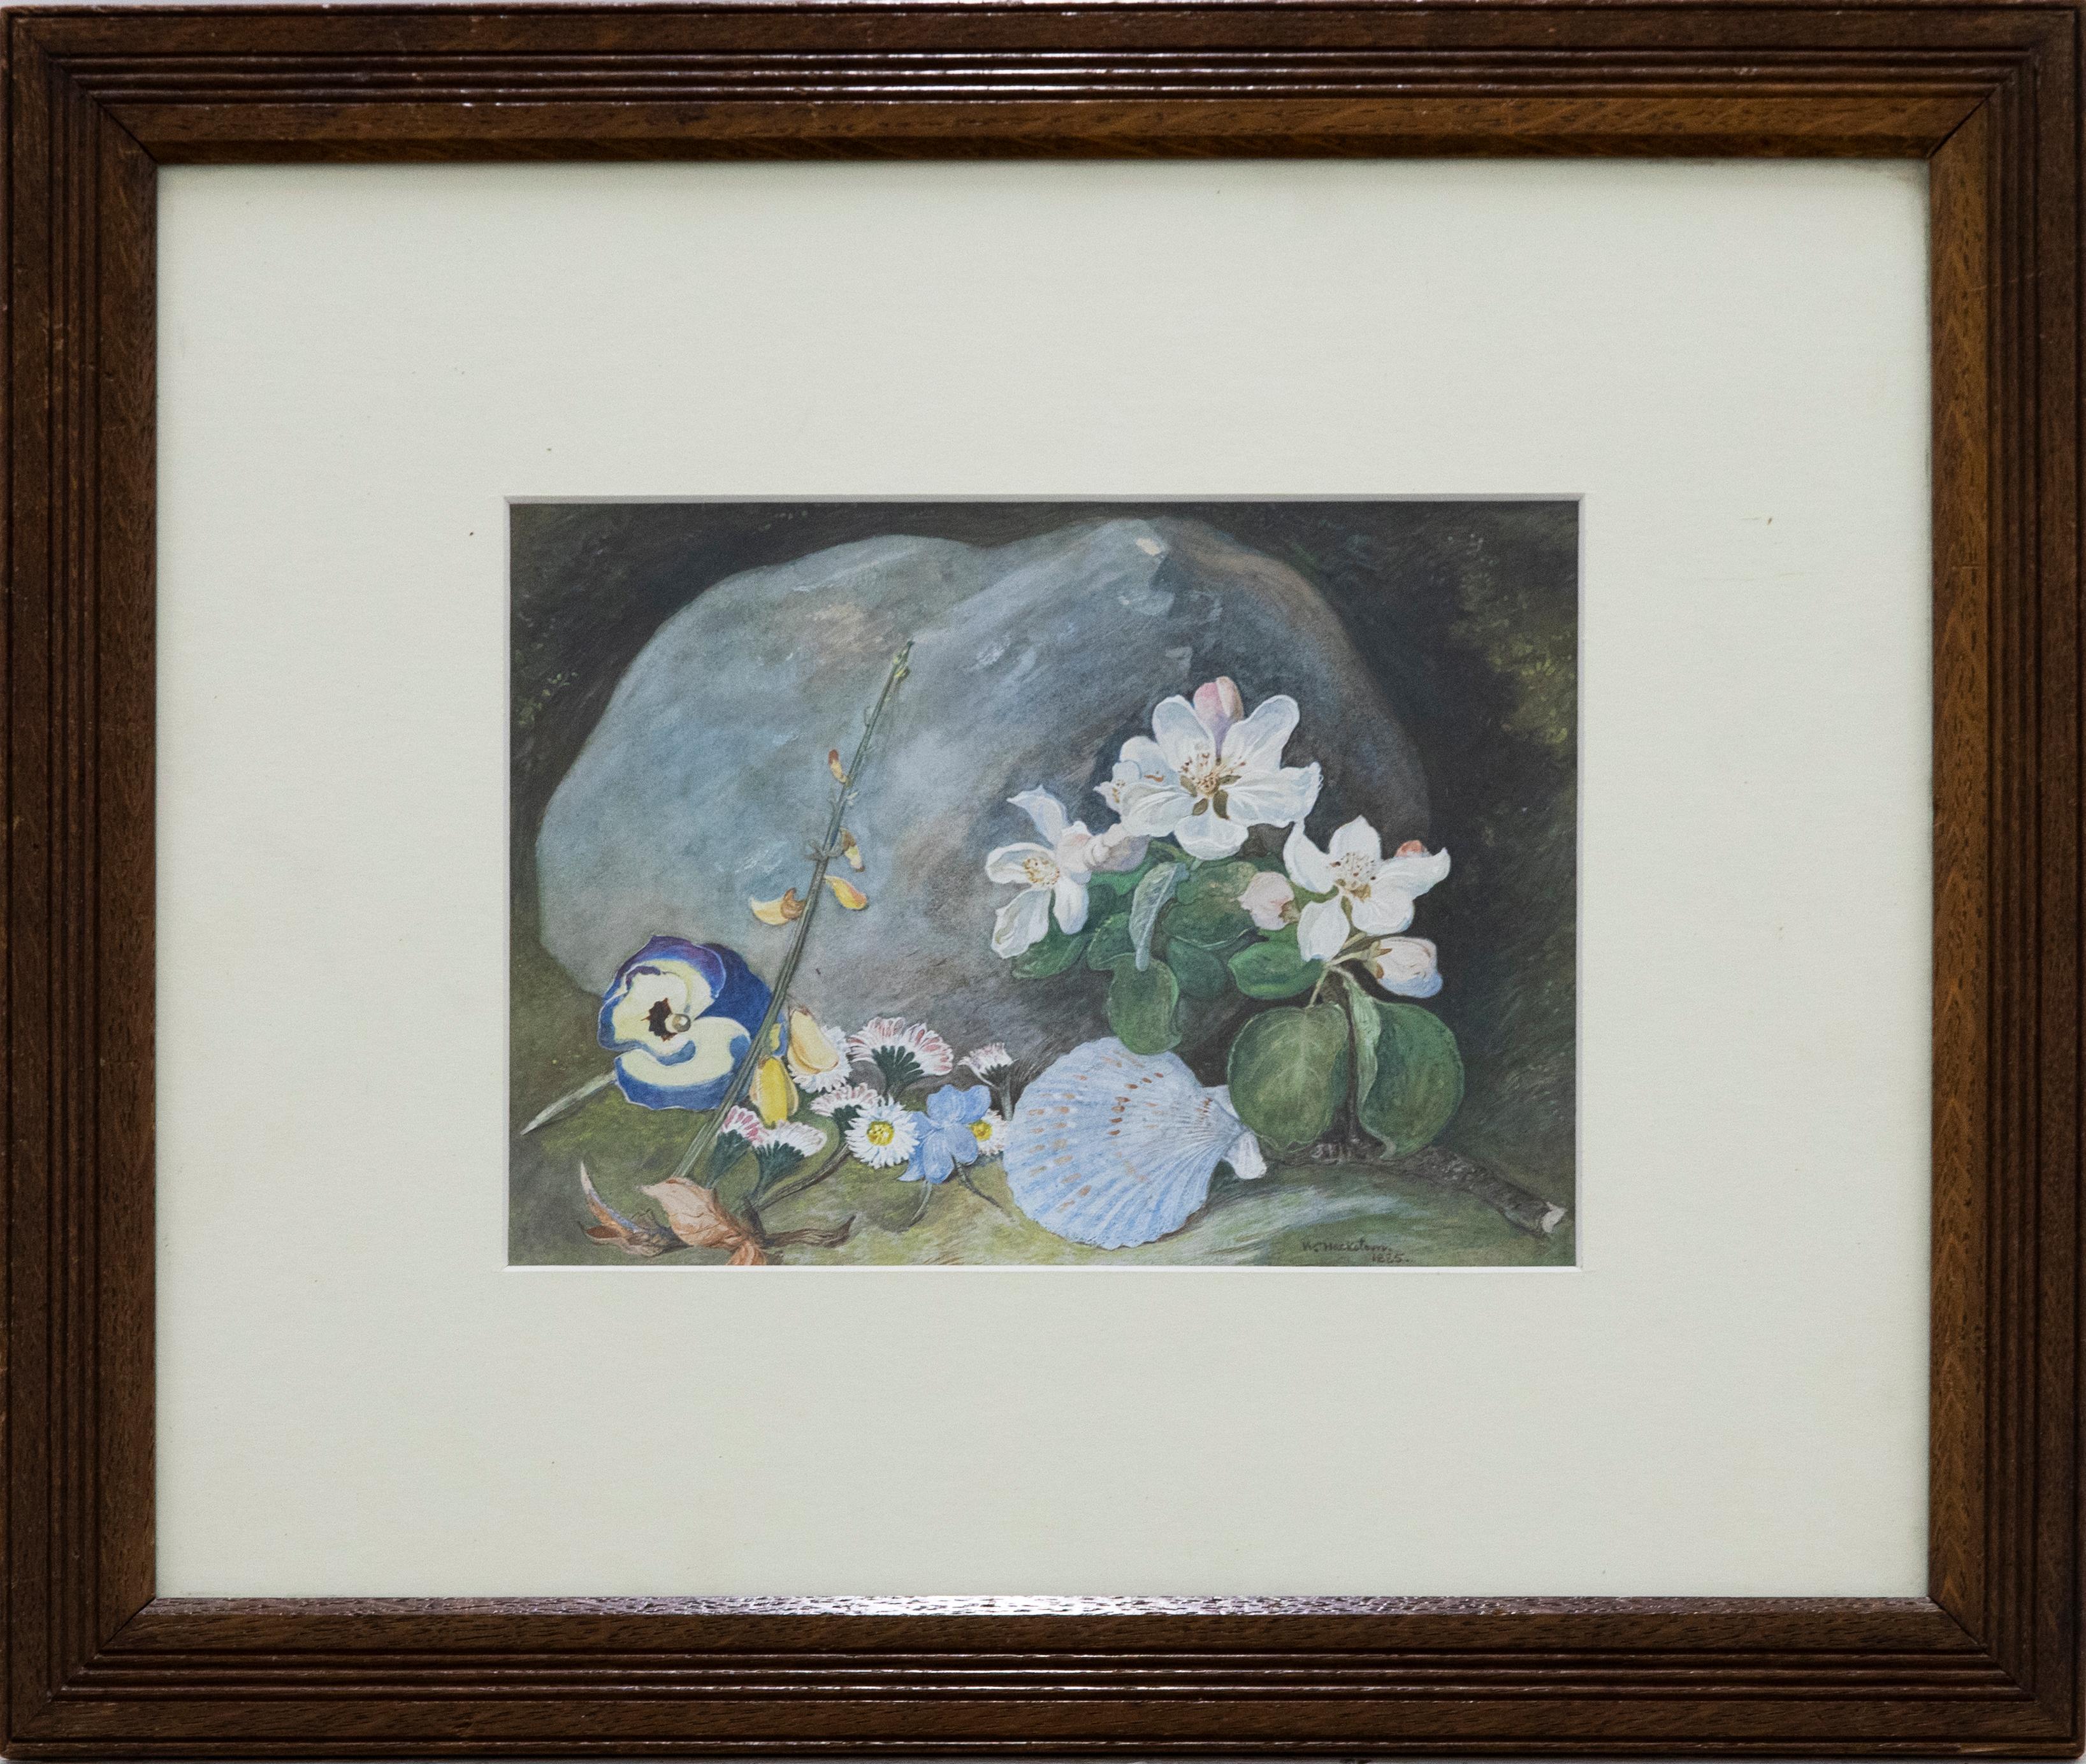 A charming 19th Century still life study depicting a seashell, dog roses and a pansy carefully placed before a rock. The artist captures the delicate flowers and their textures in great detail. Signed and dated to the lower right. Presented in a